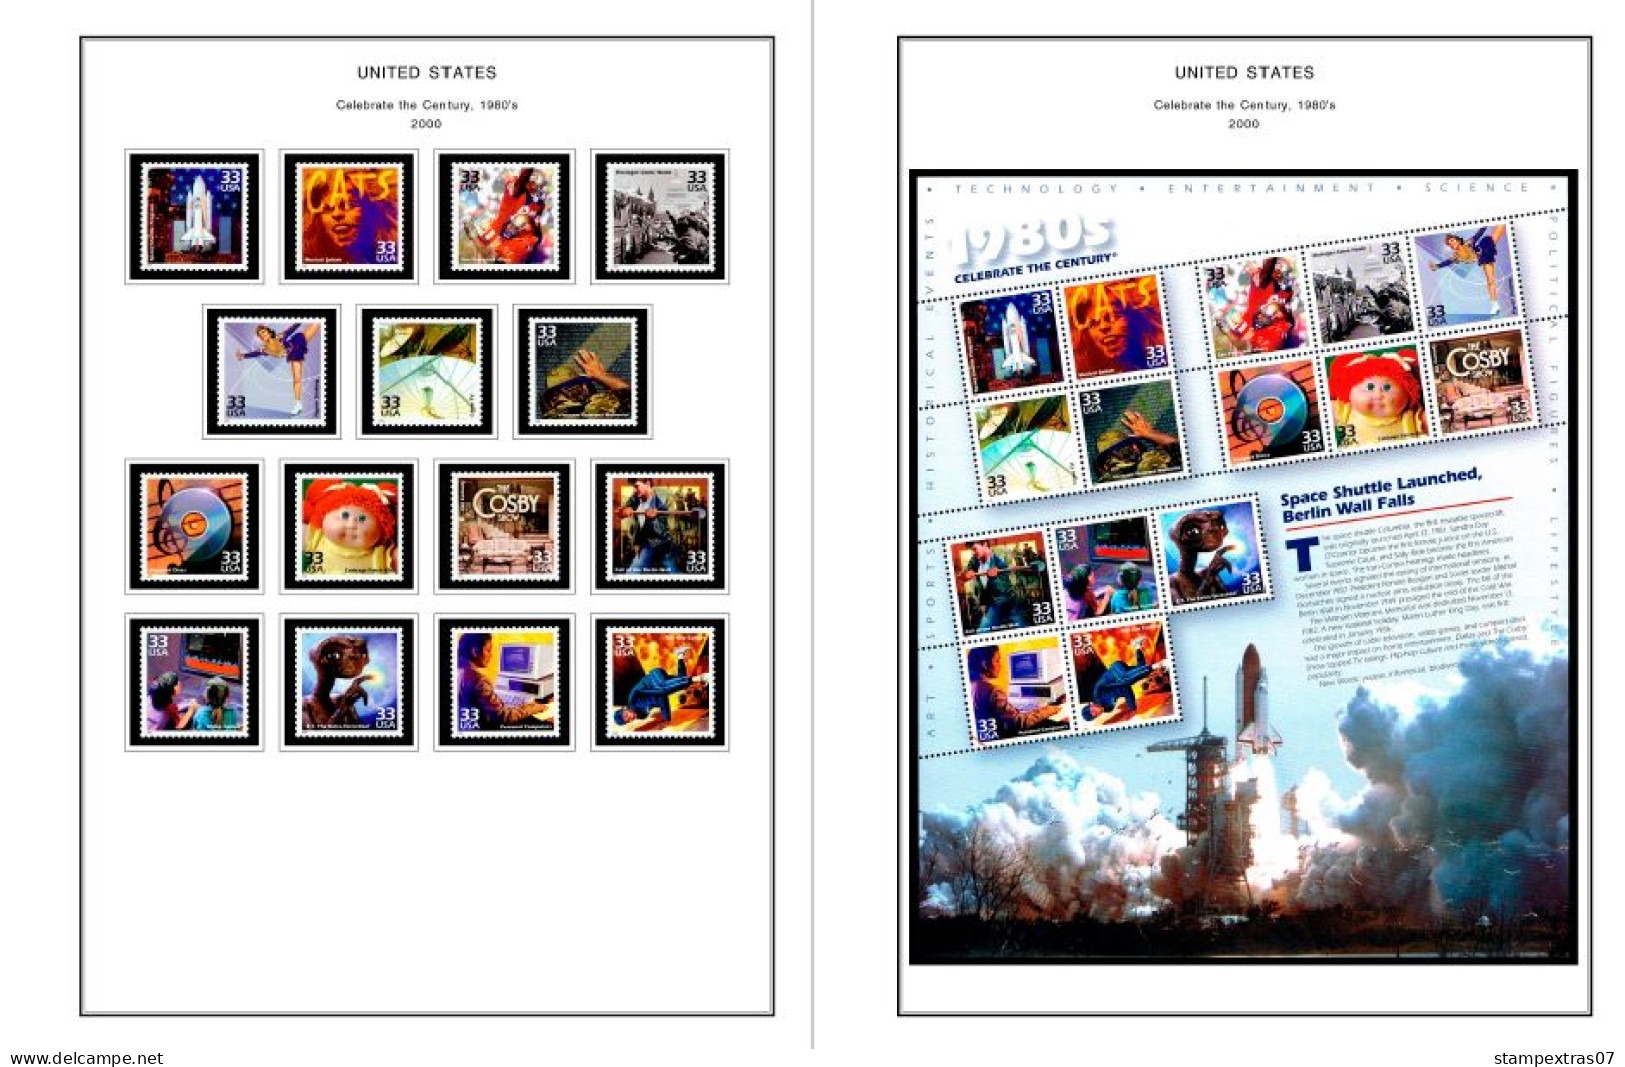 COLOR PRINTED USA 2000-2004 STAMP ALBUM PAGES (88 Illustrated Pages) >> FEUILLES ALBUM - Pre-printed Pages